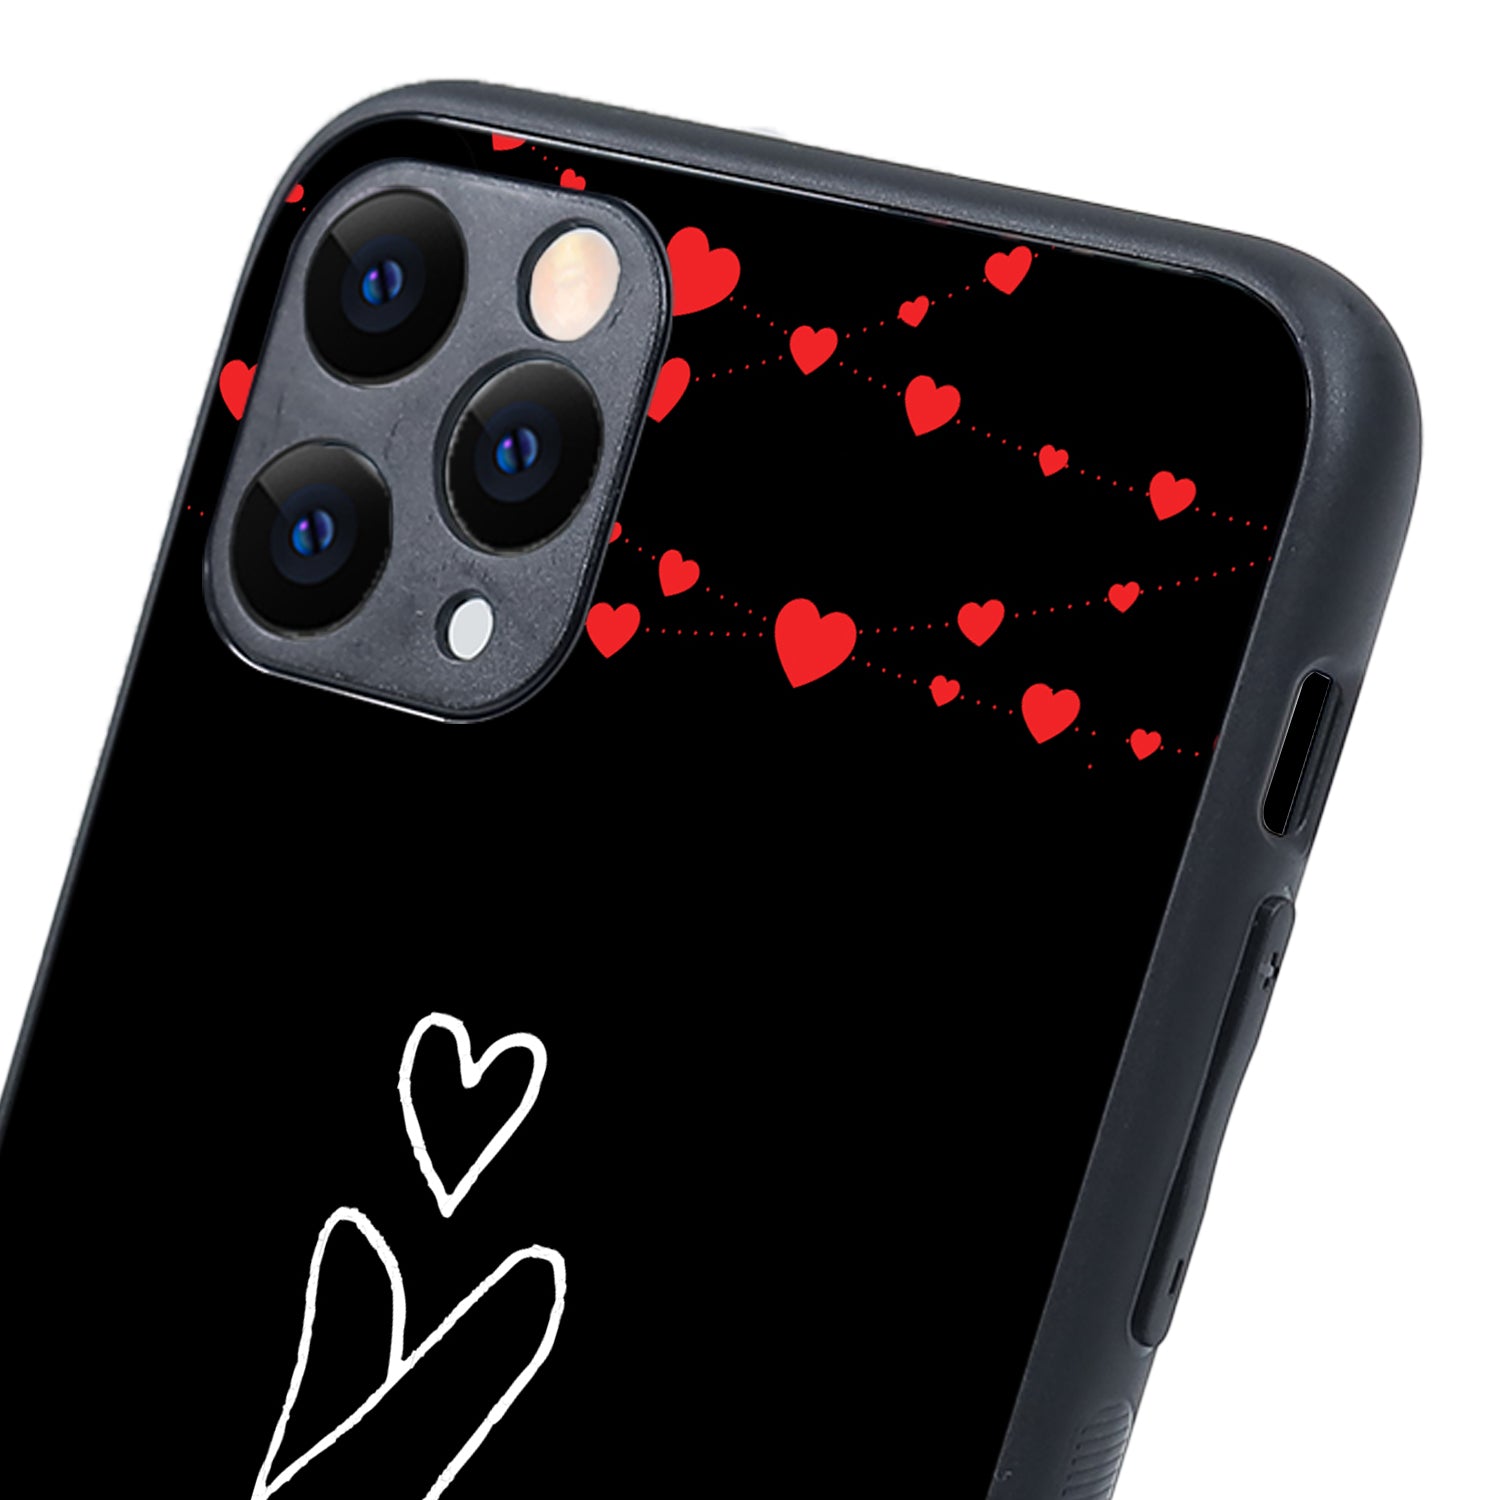 Click Heart Girl Couple iPhone 11 Pro Max Case